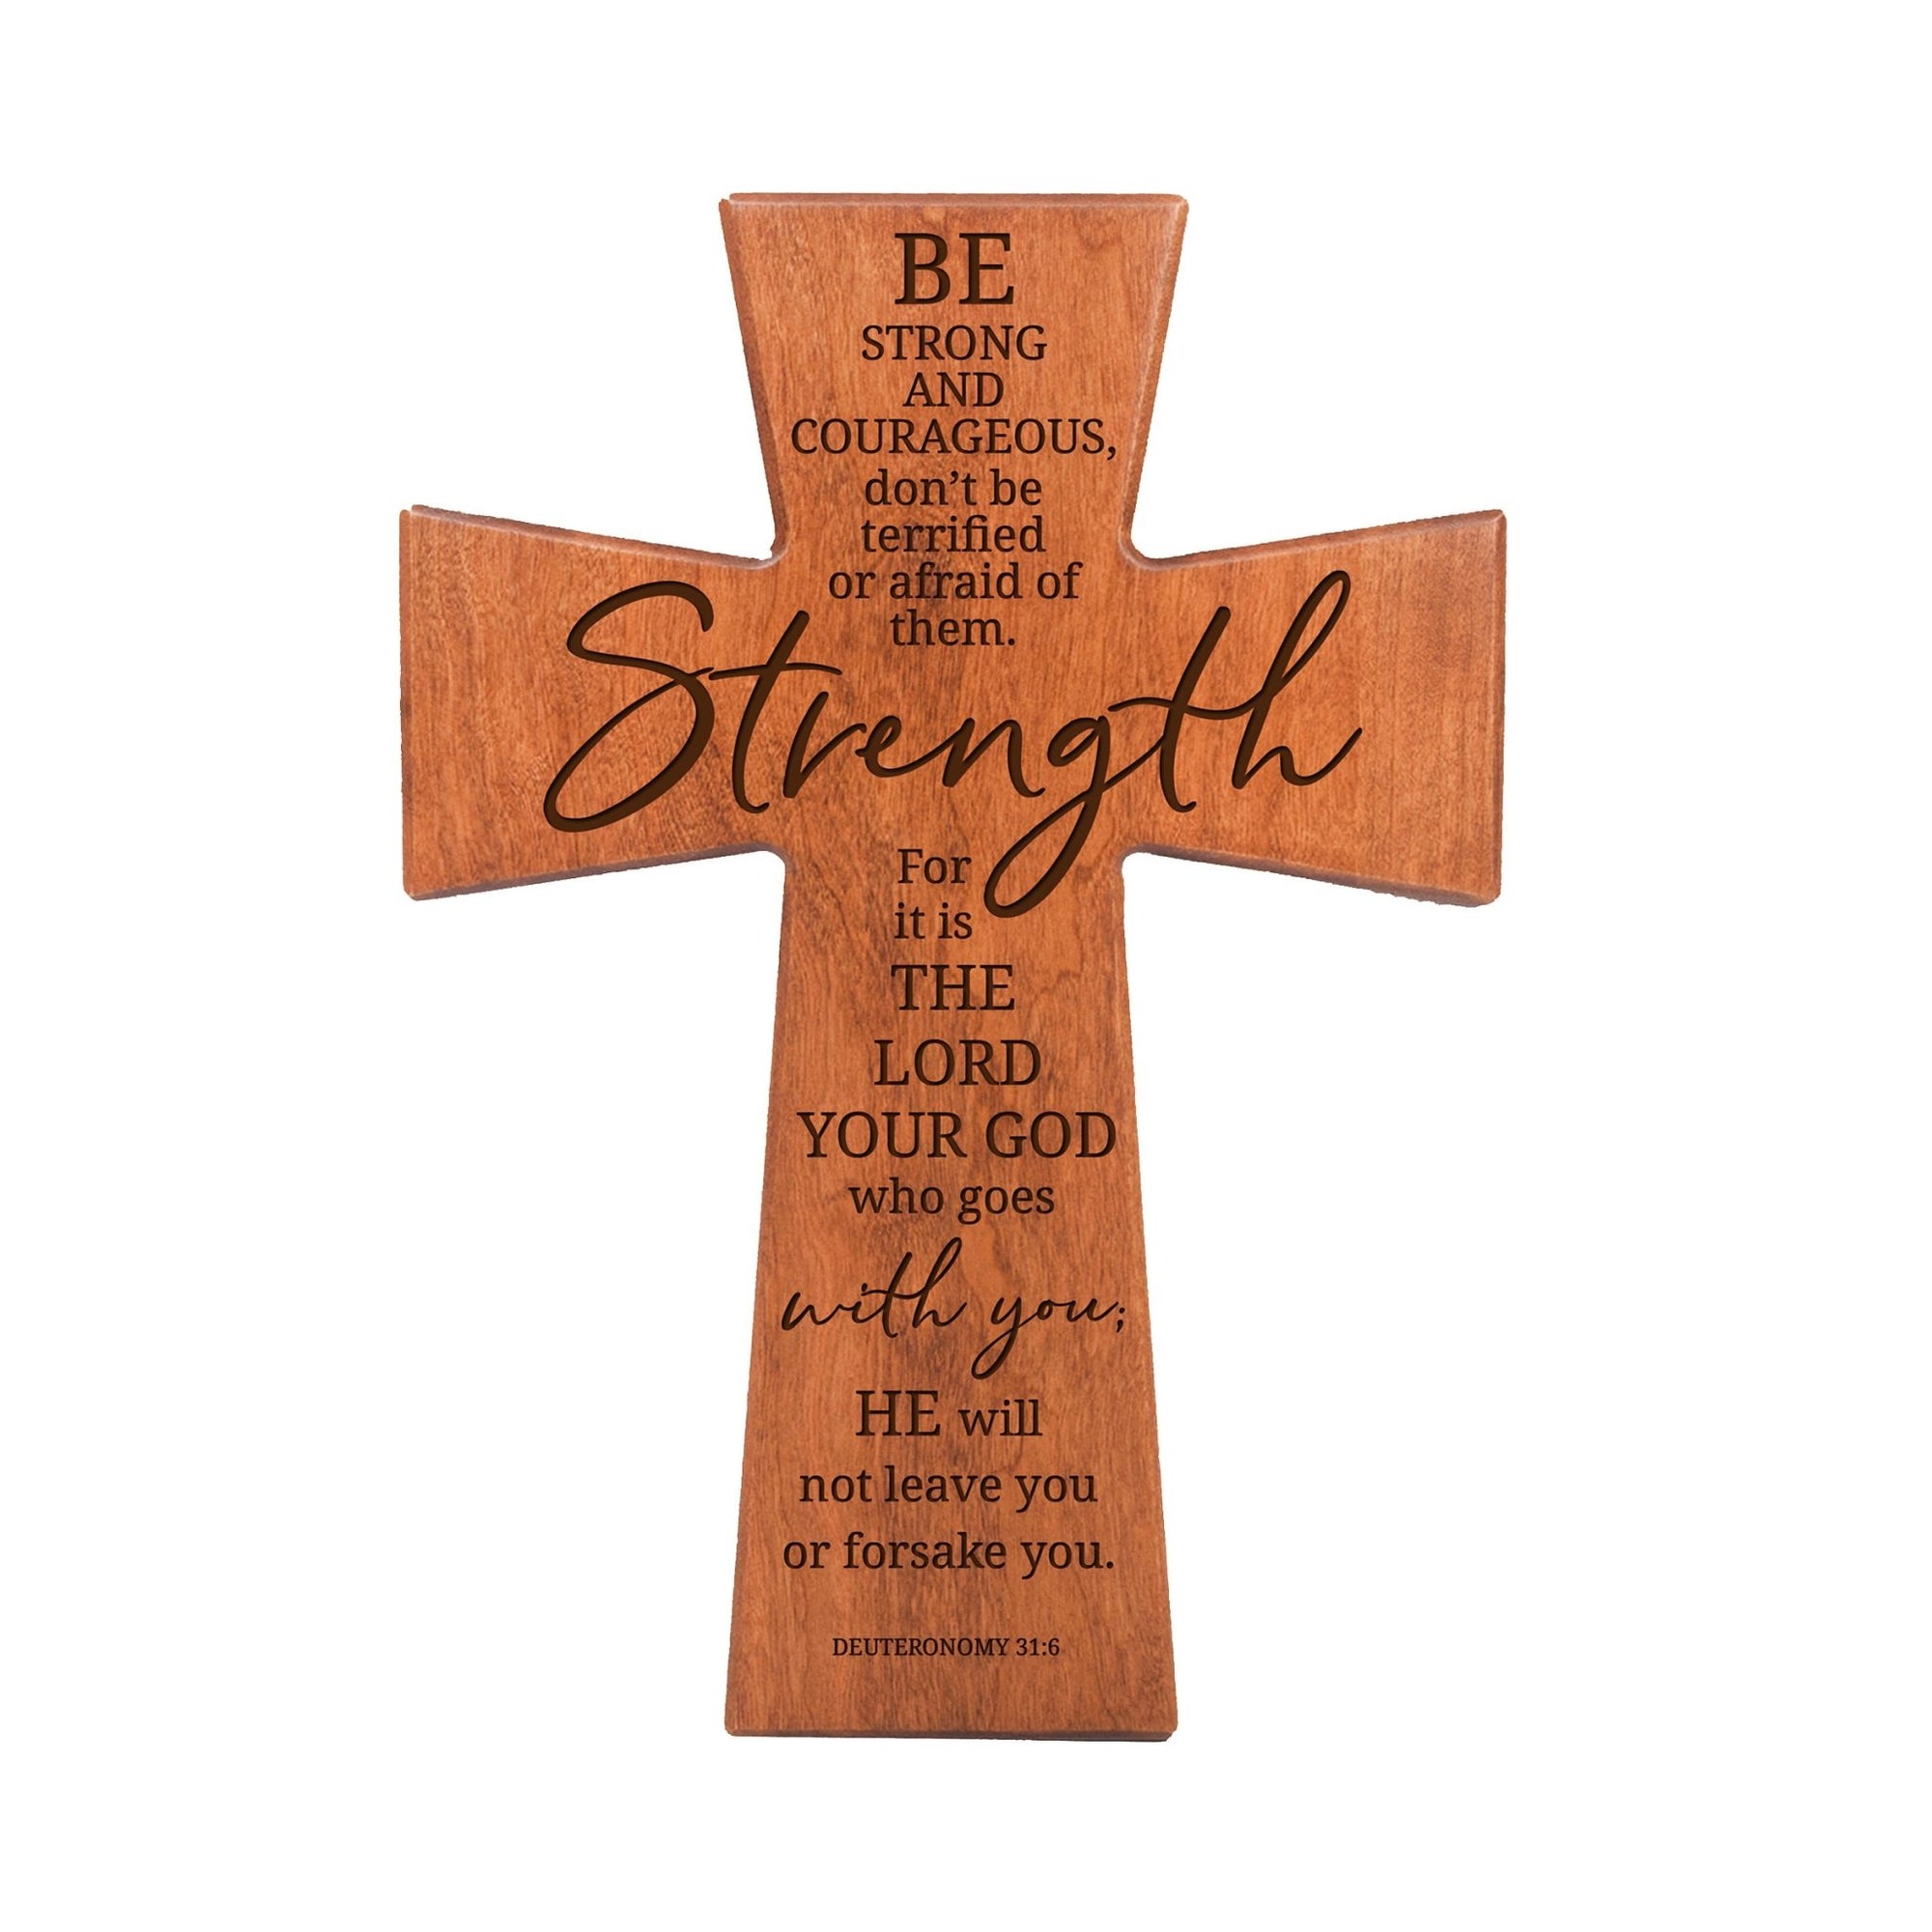 Inspirational Wooden Hanging Wall Cross 7x11 – Be strong and courageous - LifeSong Milestones